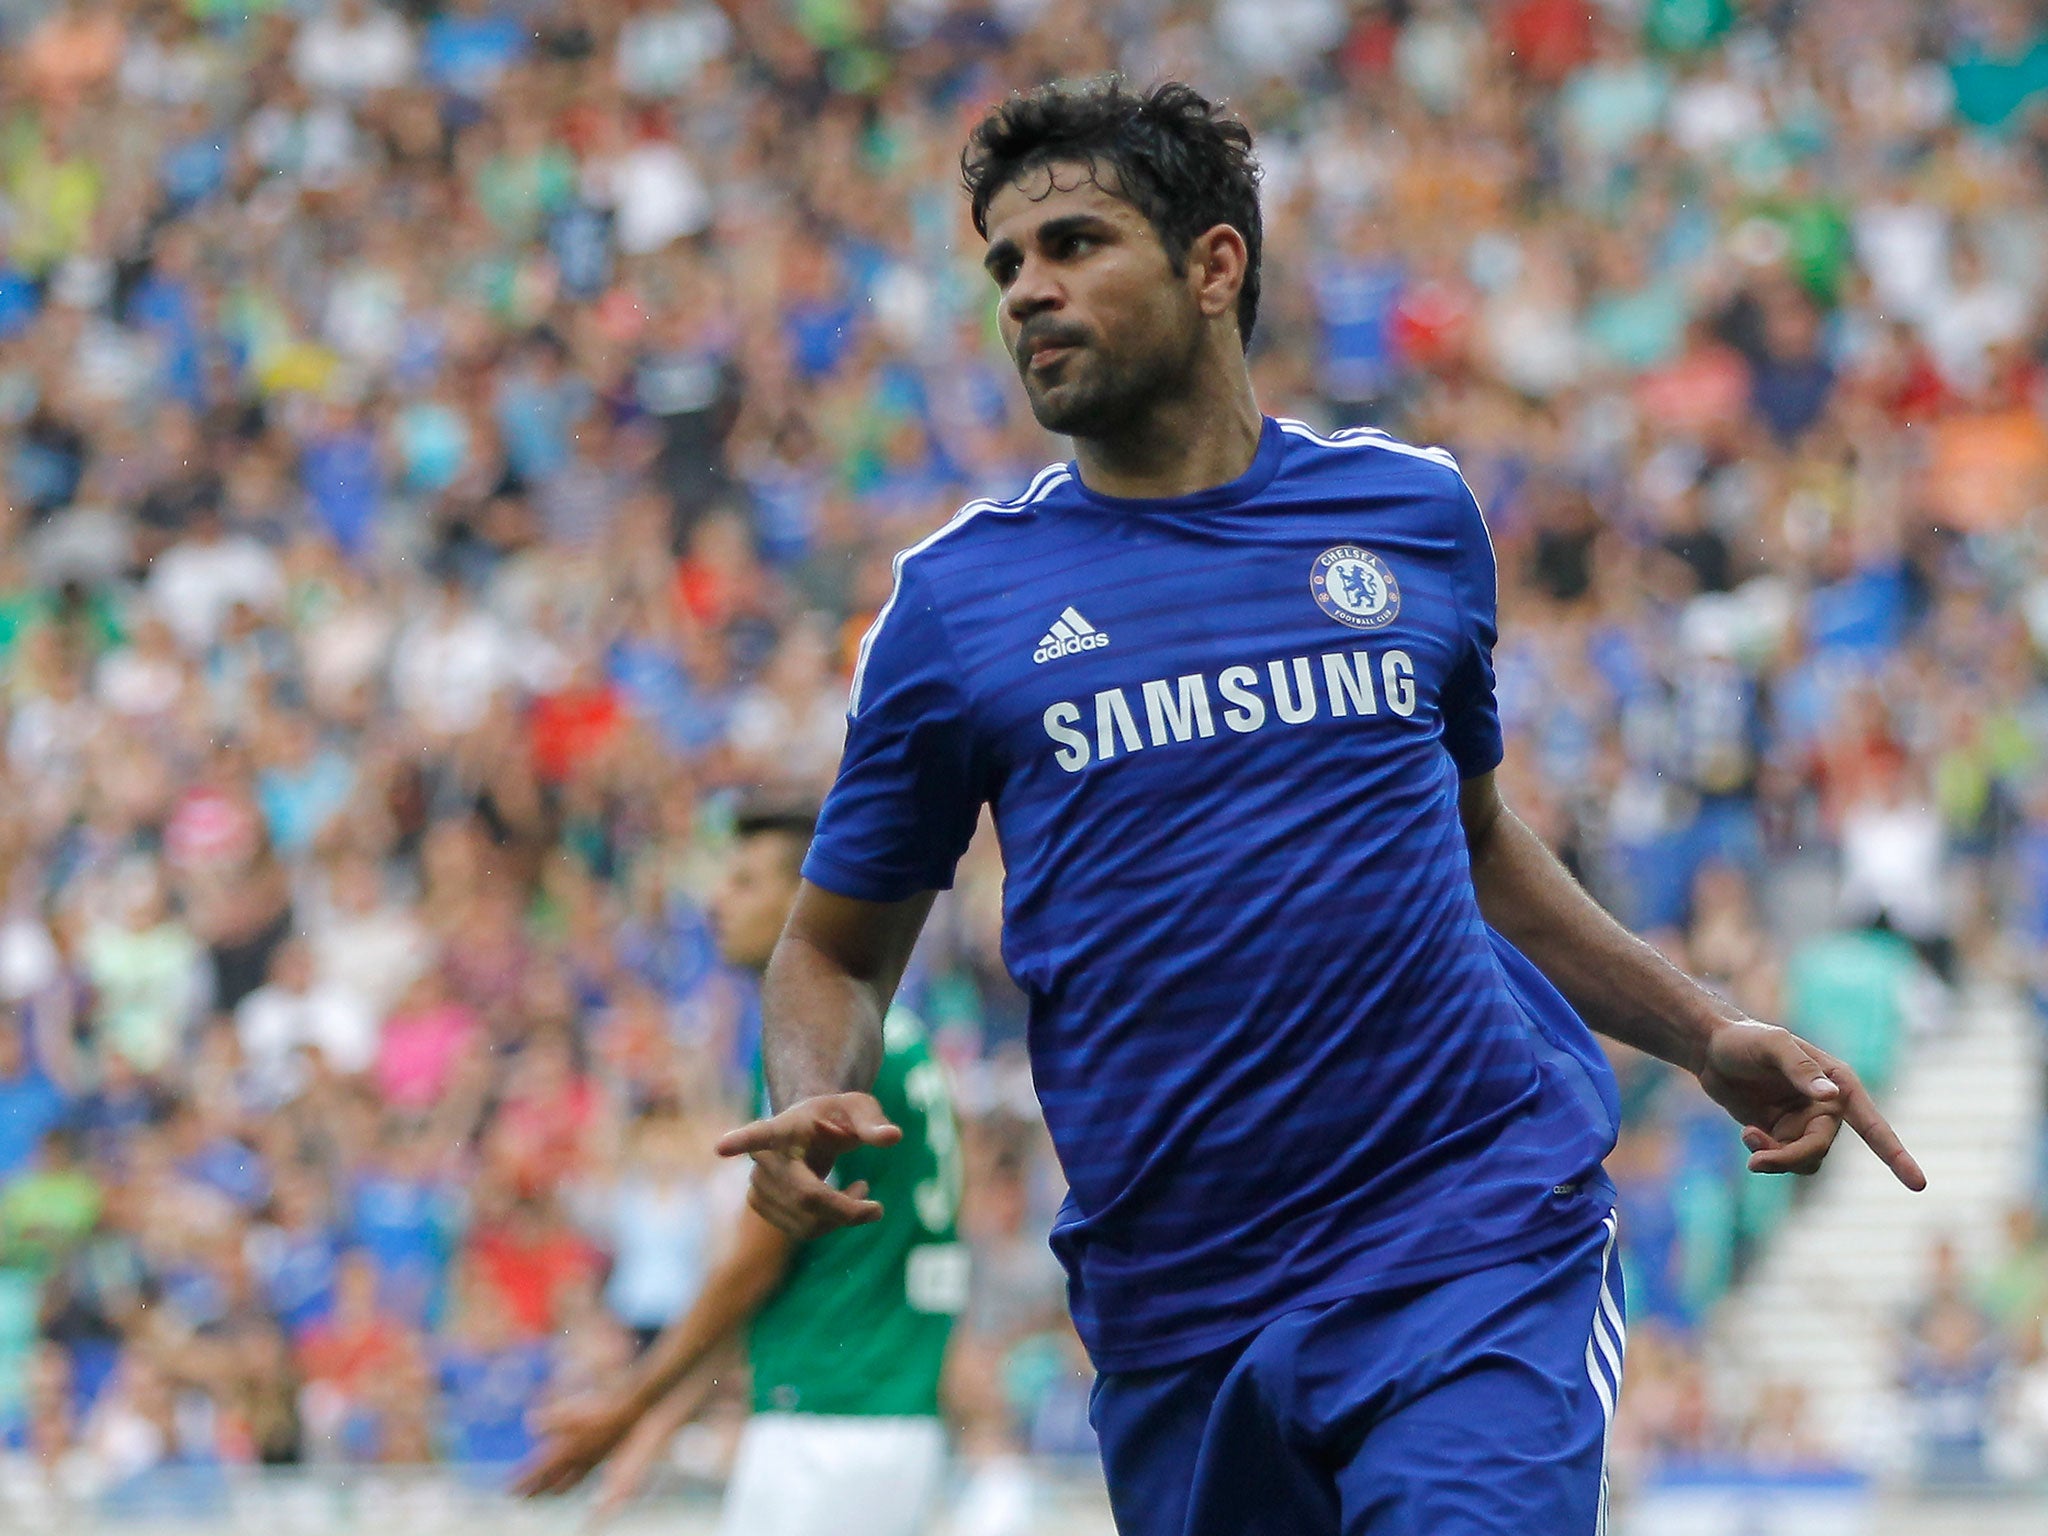 Chelsea striker Diego Costa scored a goal on his Chelsea debut